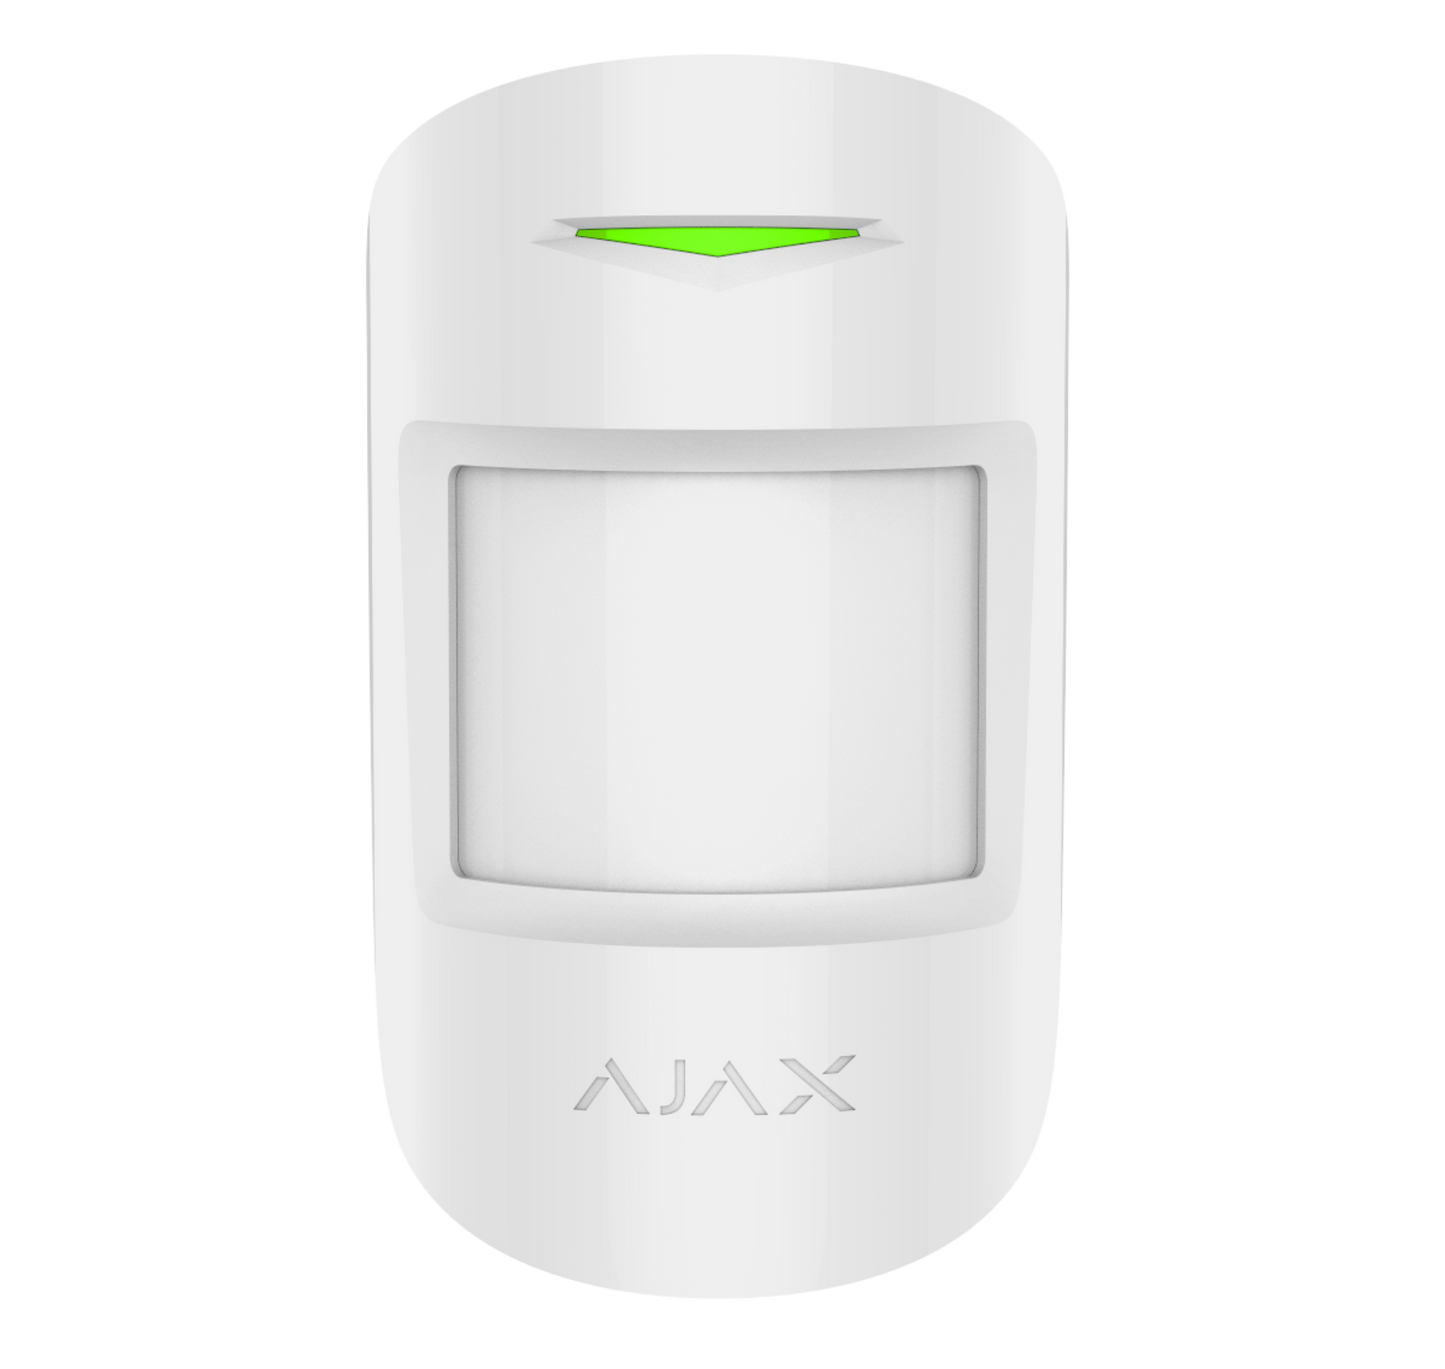 White Ajax MotionProtect wireless motion sensor from Ajax Security Systems, 110 × 65 × 50 mm in size, 86grams in weight . for smart home and business security, front view of device